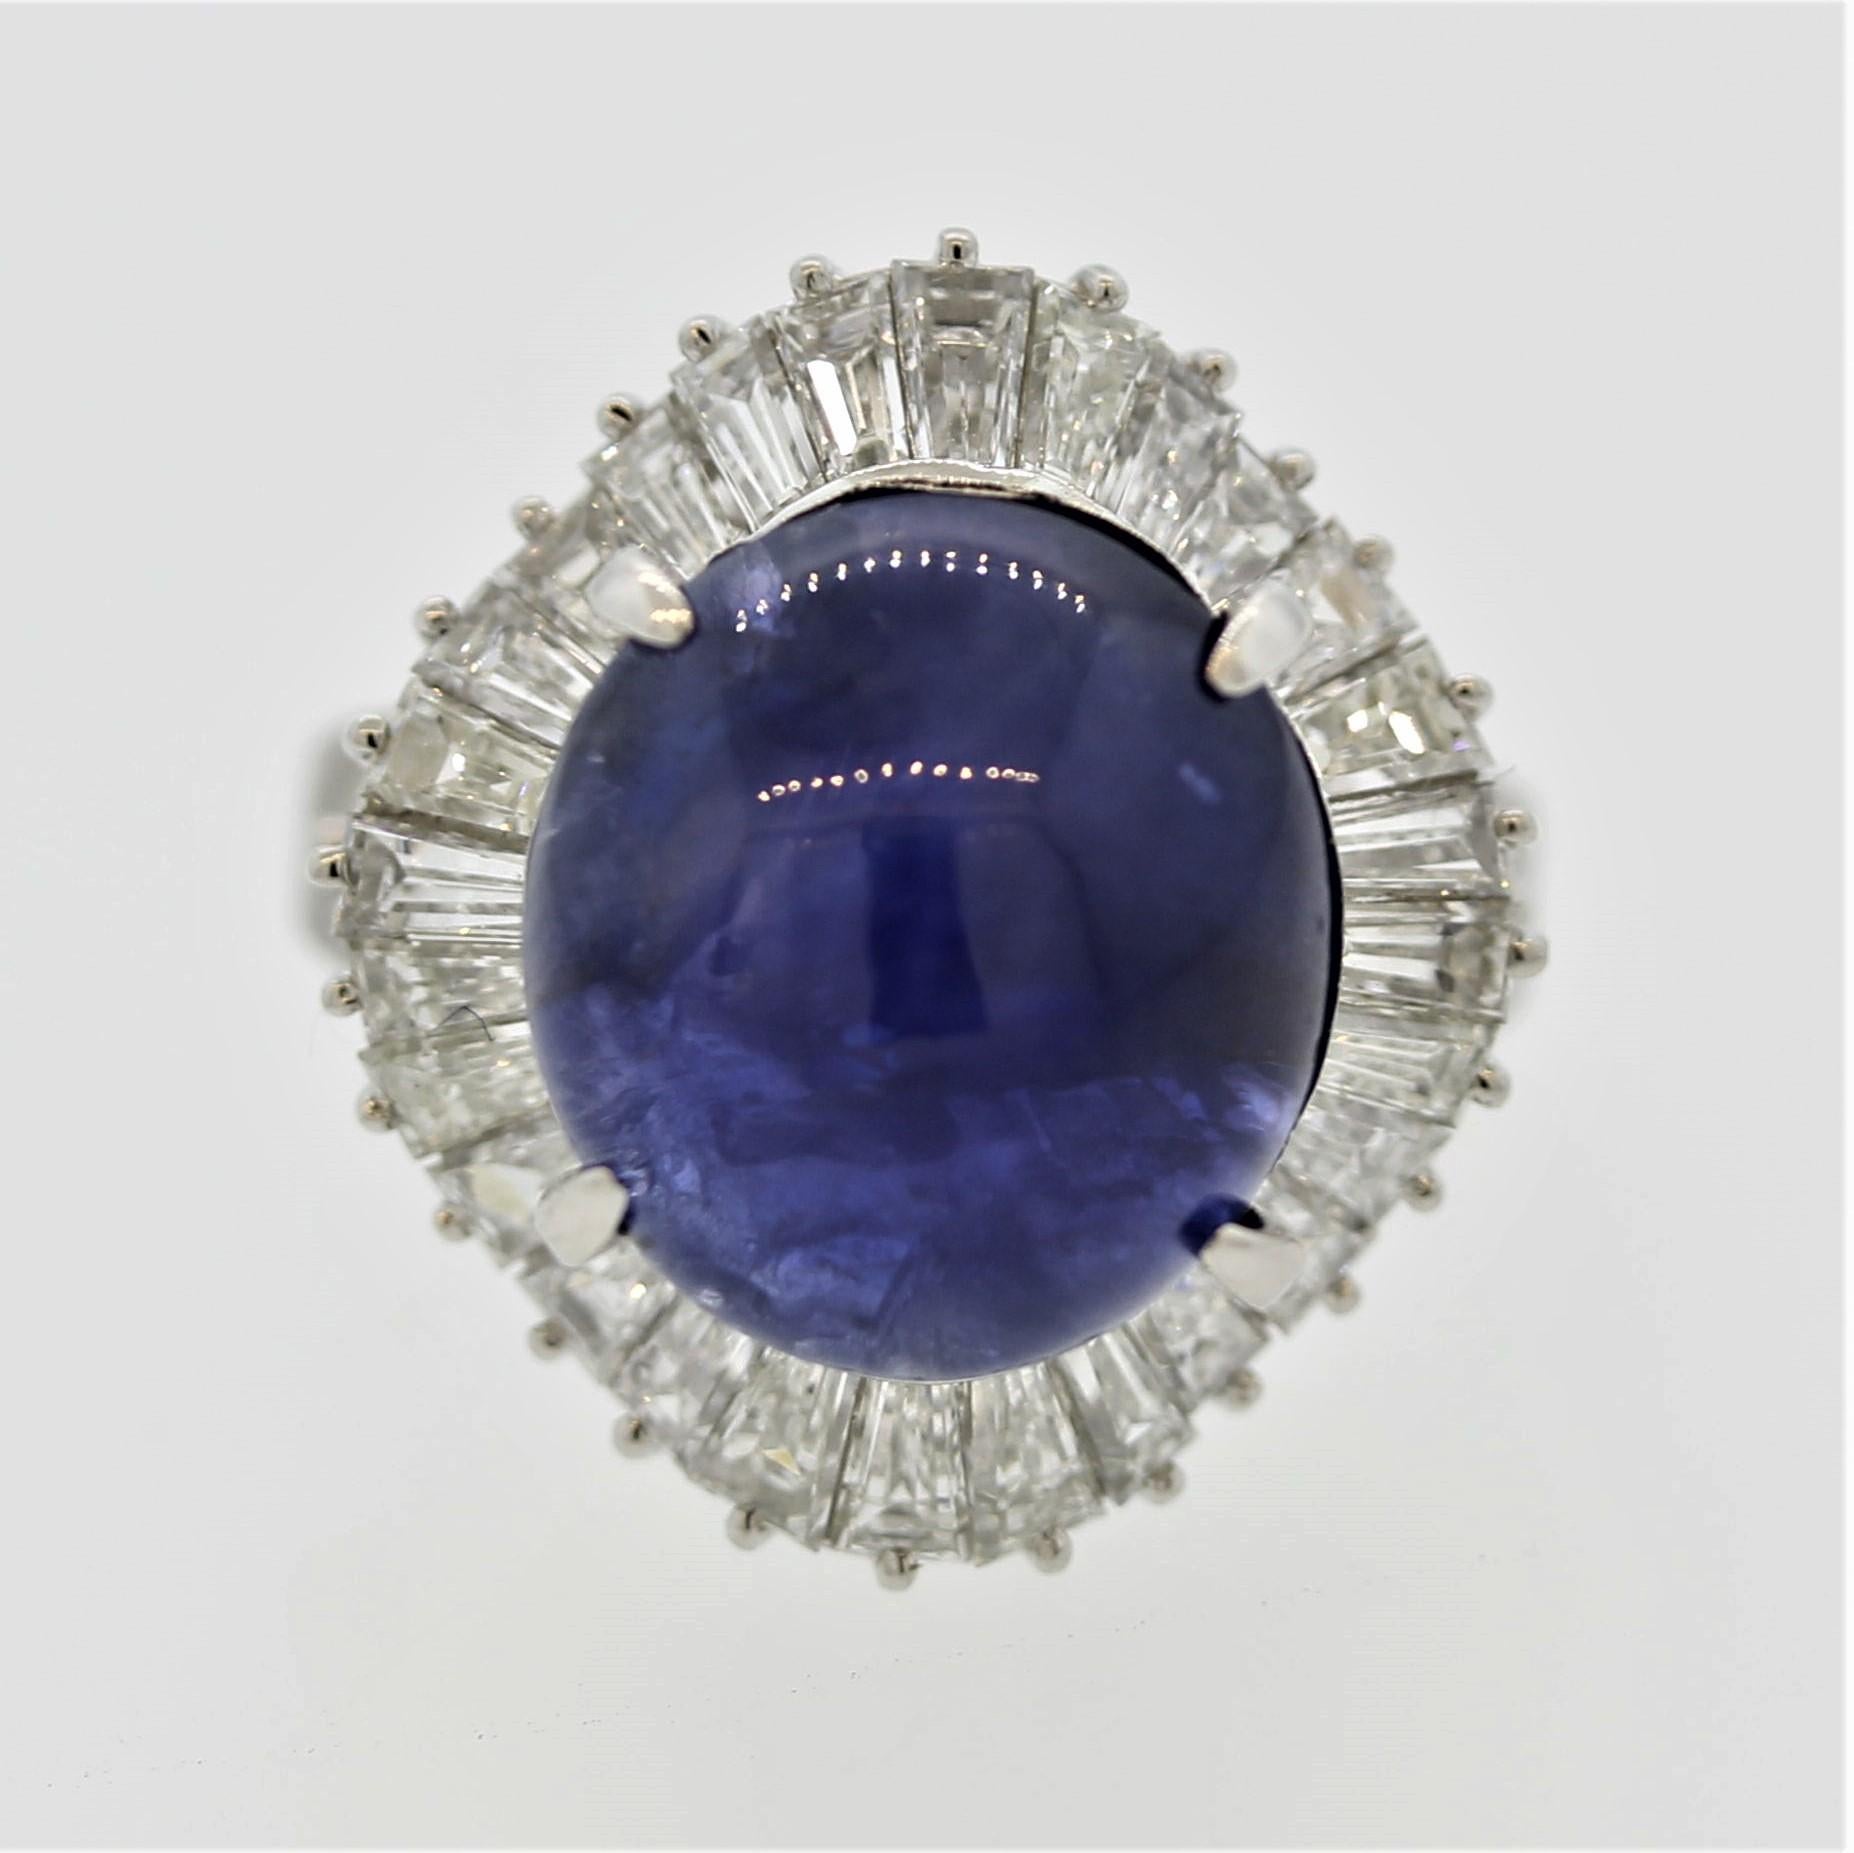 A special sapphire weighing 11.97 carats which has the ideal royal blue color. As you gaze inside the stone your mind comes to an ease as the rich blue color mesmerizes you. The sapphire also has a strong star as a light hits its top. It is accented